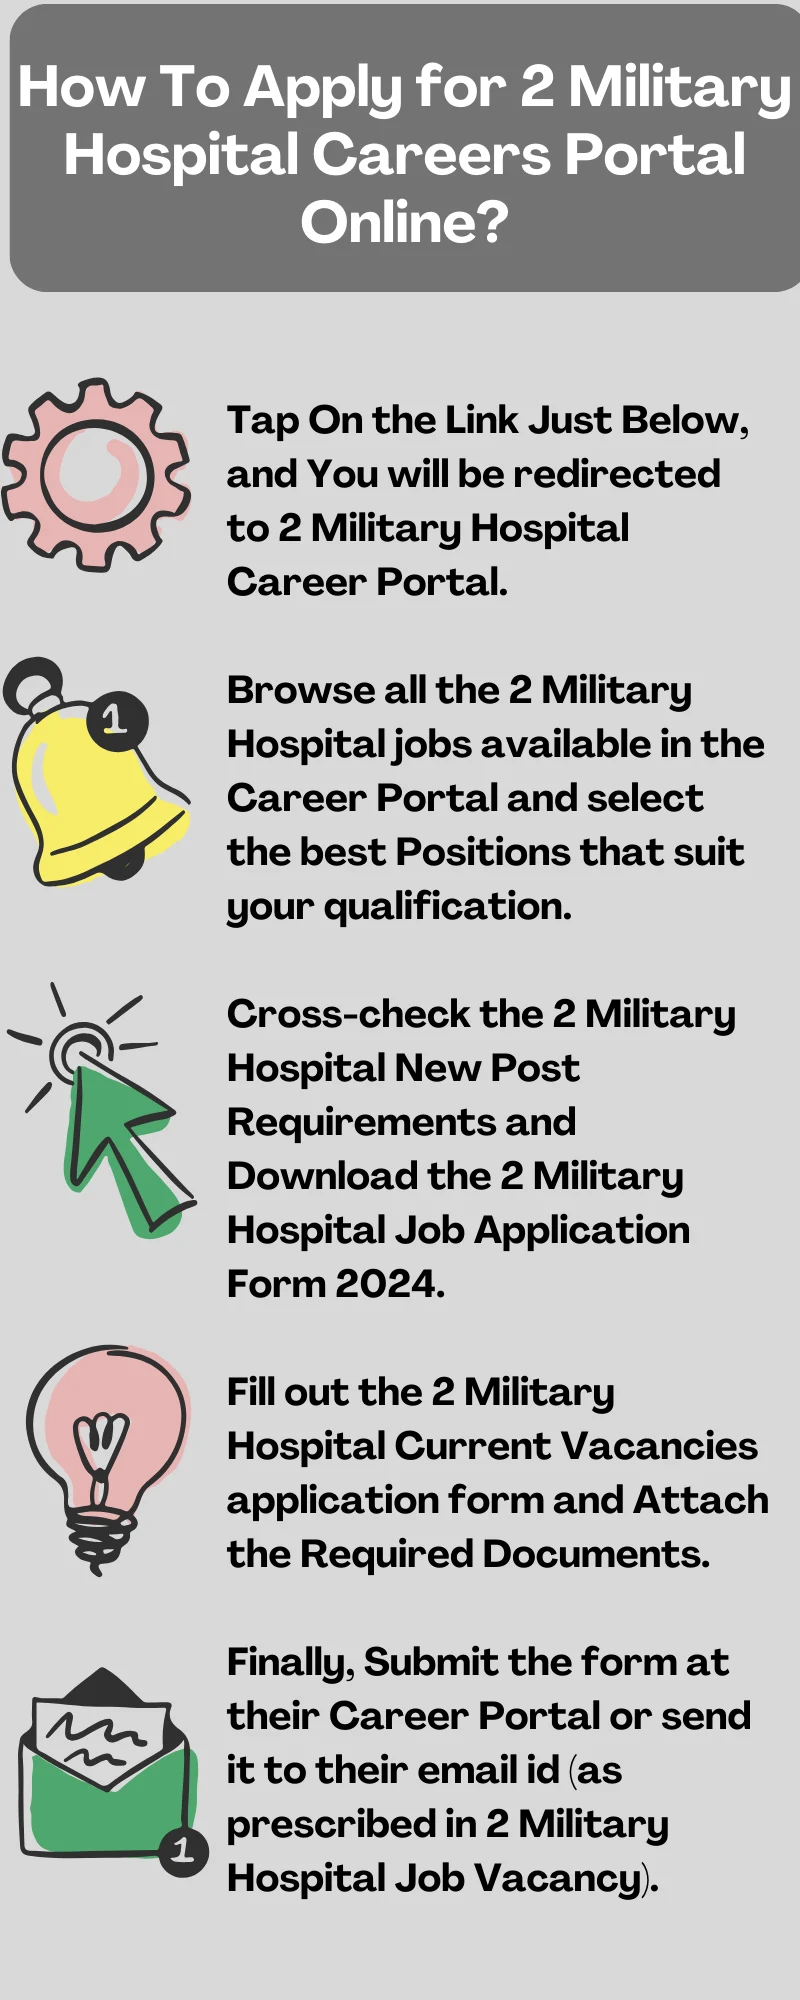 How To Apply for 2 Military Hospital Careers Portal Online?